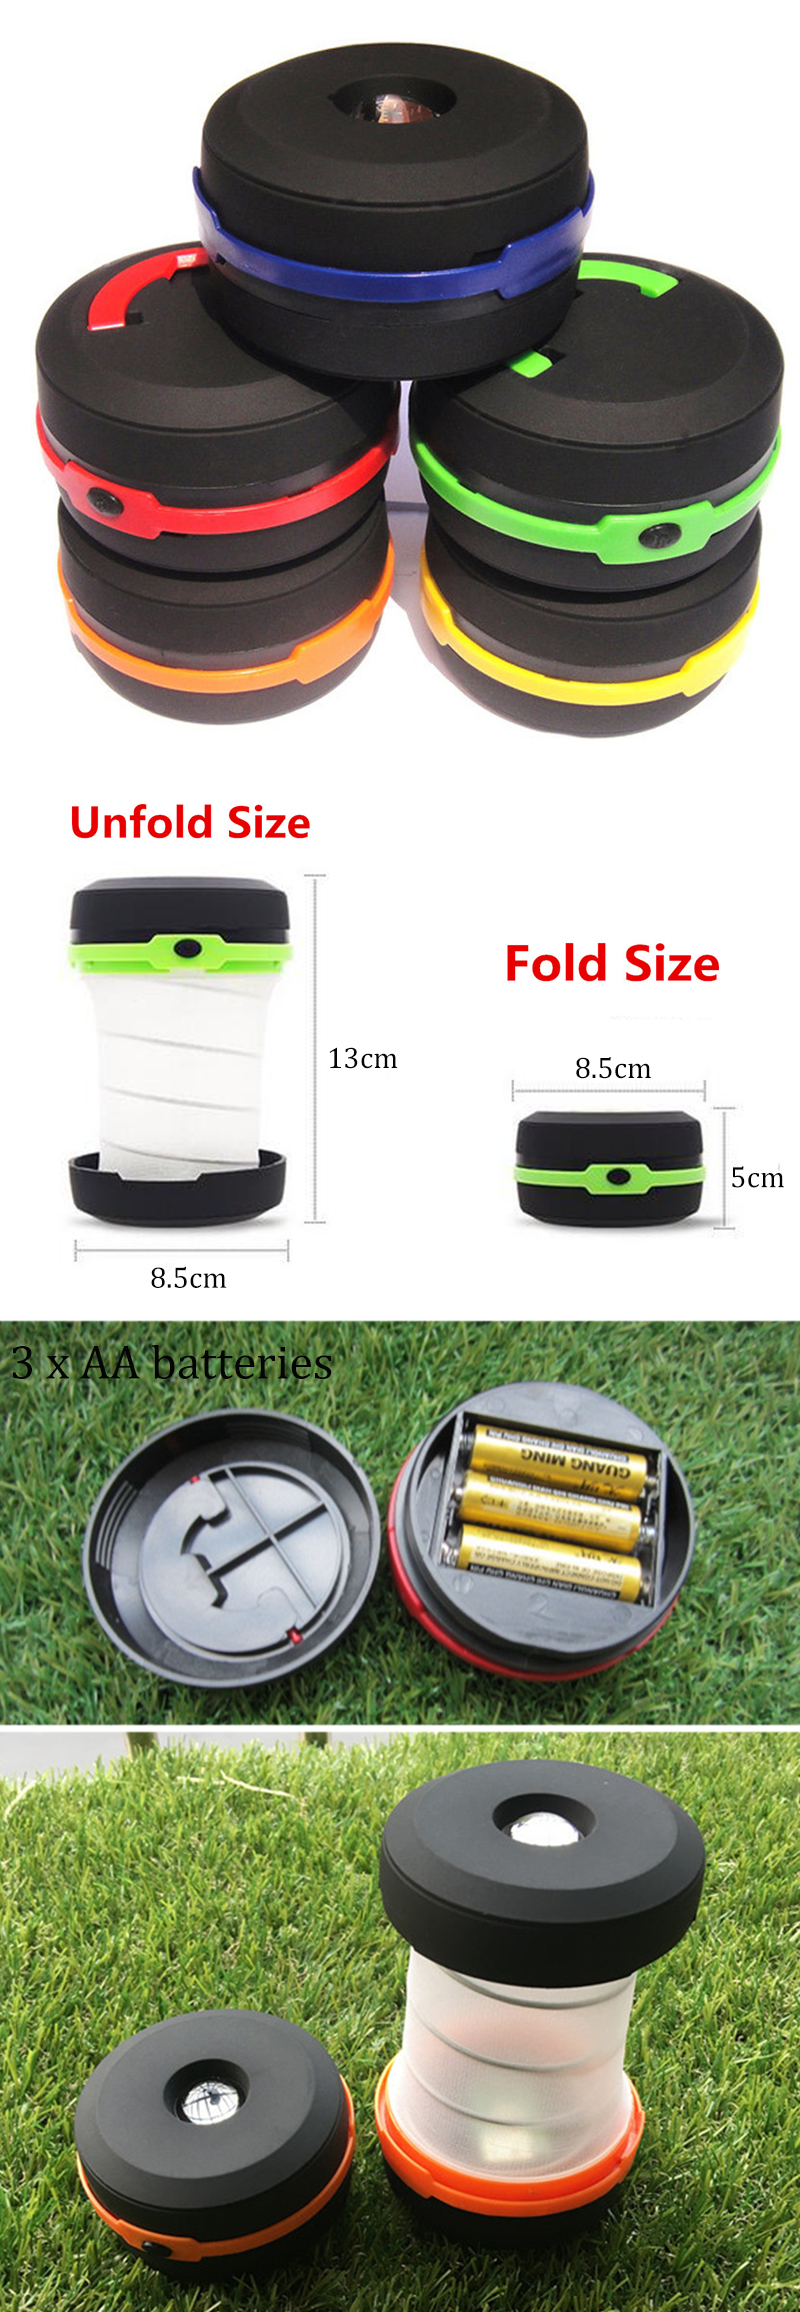 100LM-Portable-Waterproof-LED-Camping-Tent-Light-Outdoor-Emergency-Lantern-Battery-Flashlight-Lamp-1353671